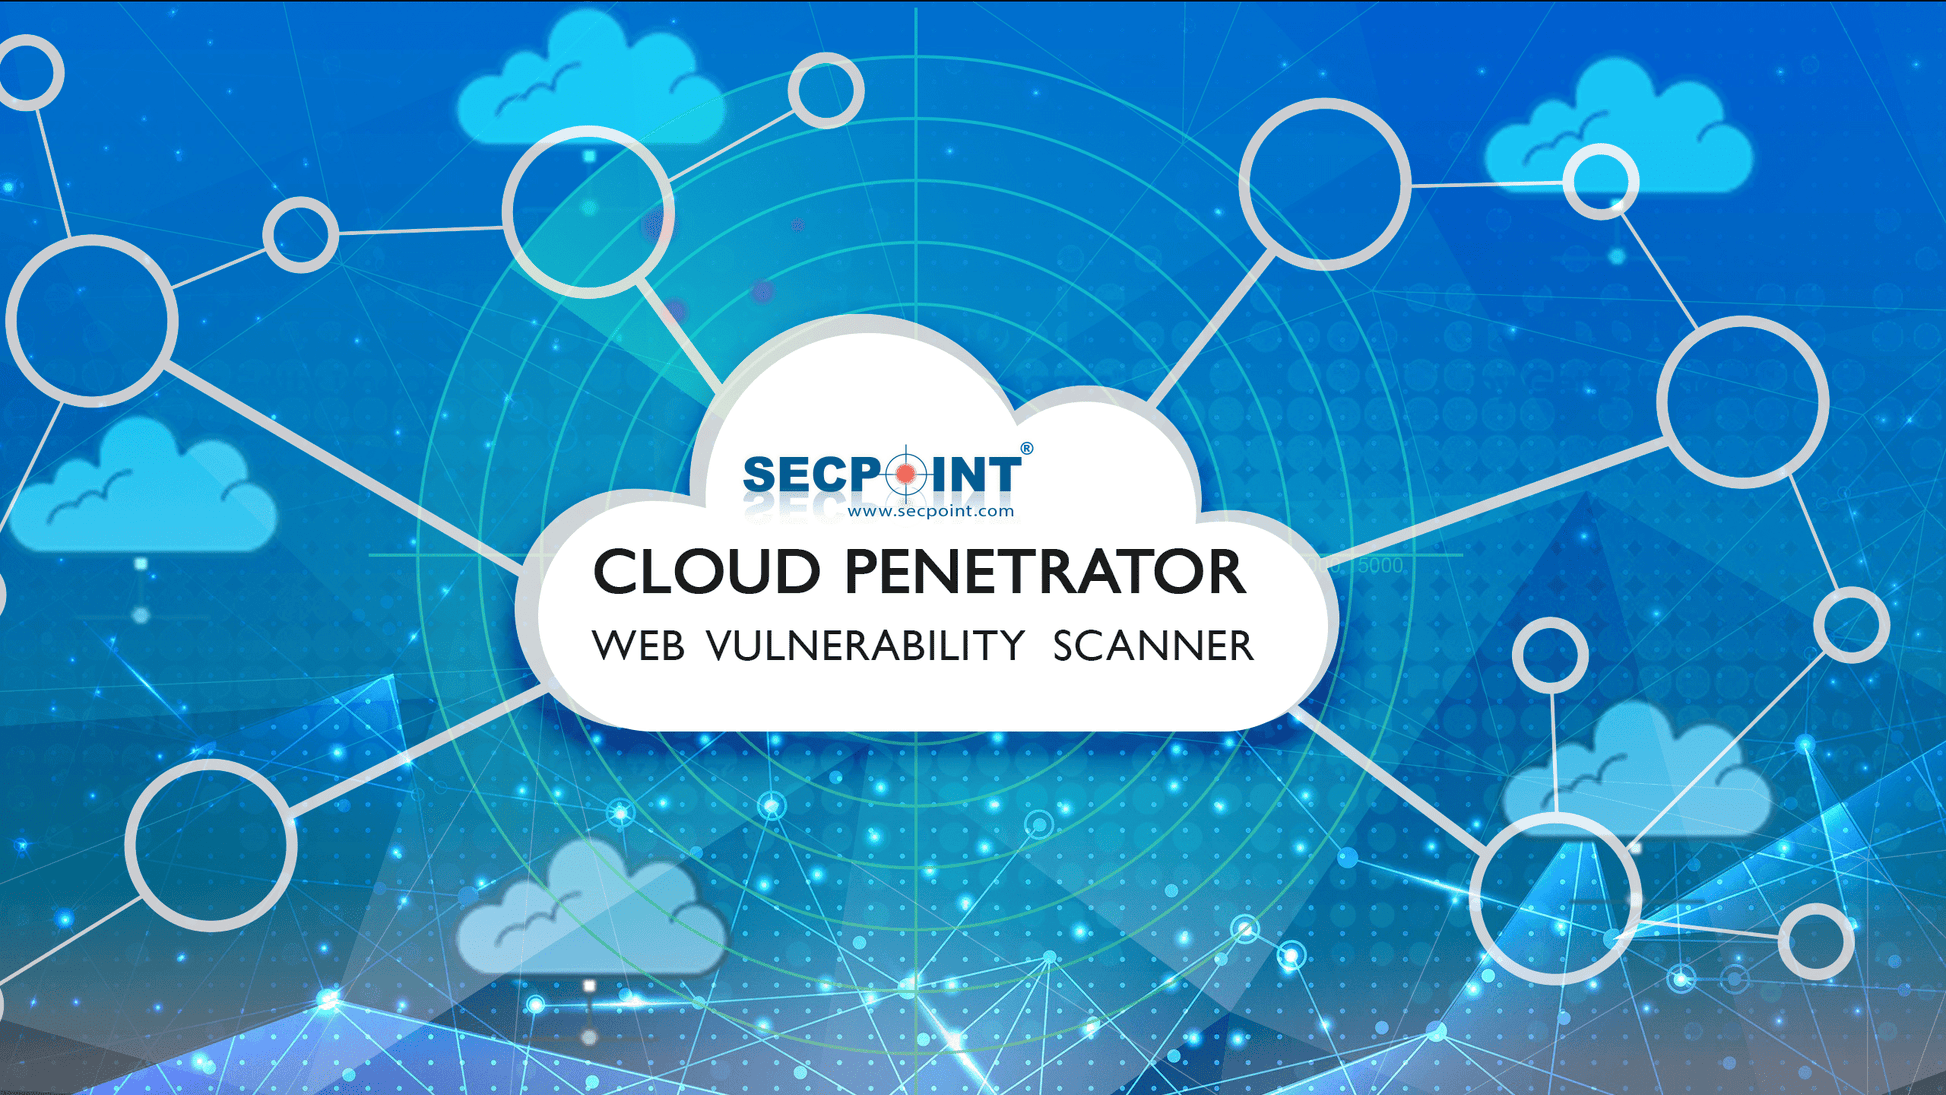 SecPoint Cloud Penetrator S9 - Vulnerability Scanning of 256 IPs  for 3 Year Static Scan License - SecPoint